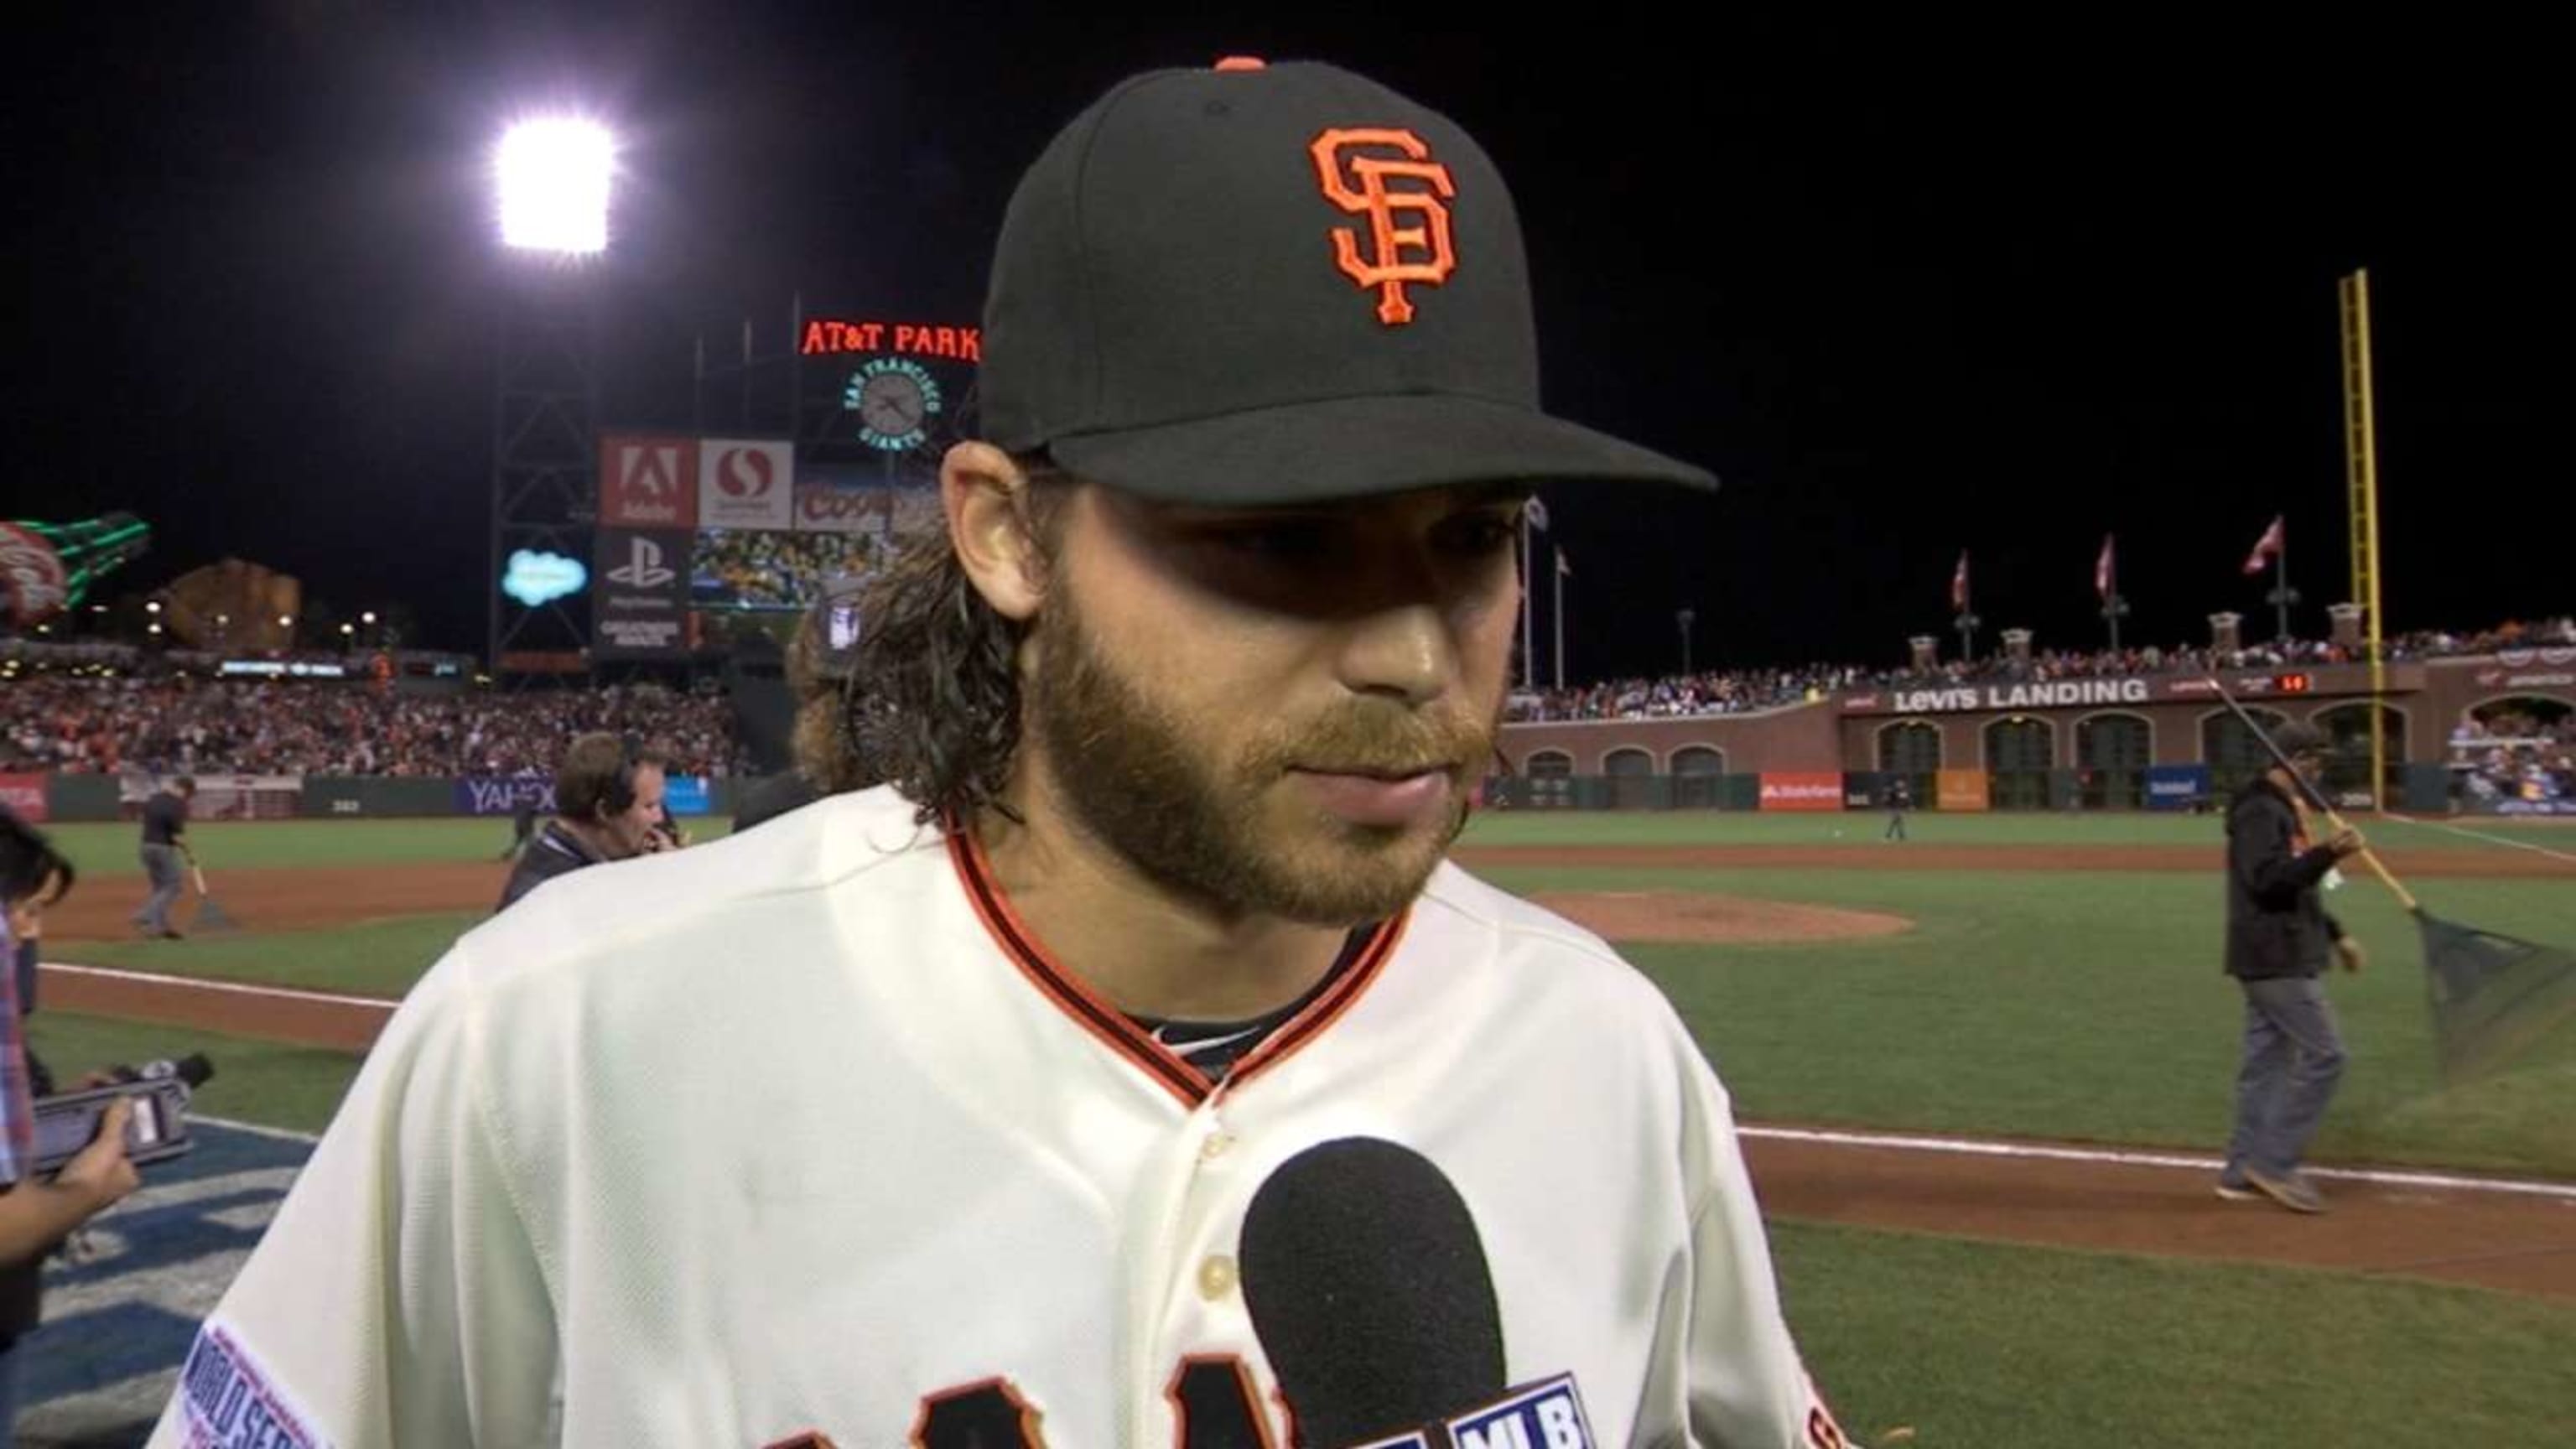 October 29, 2014: Bumgarner's heroics lift Giants to World Series win in  Game 7 – Society for American Baseball Research